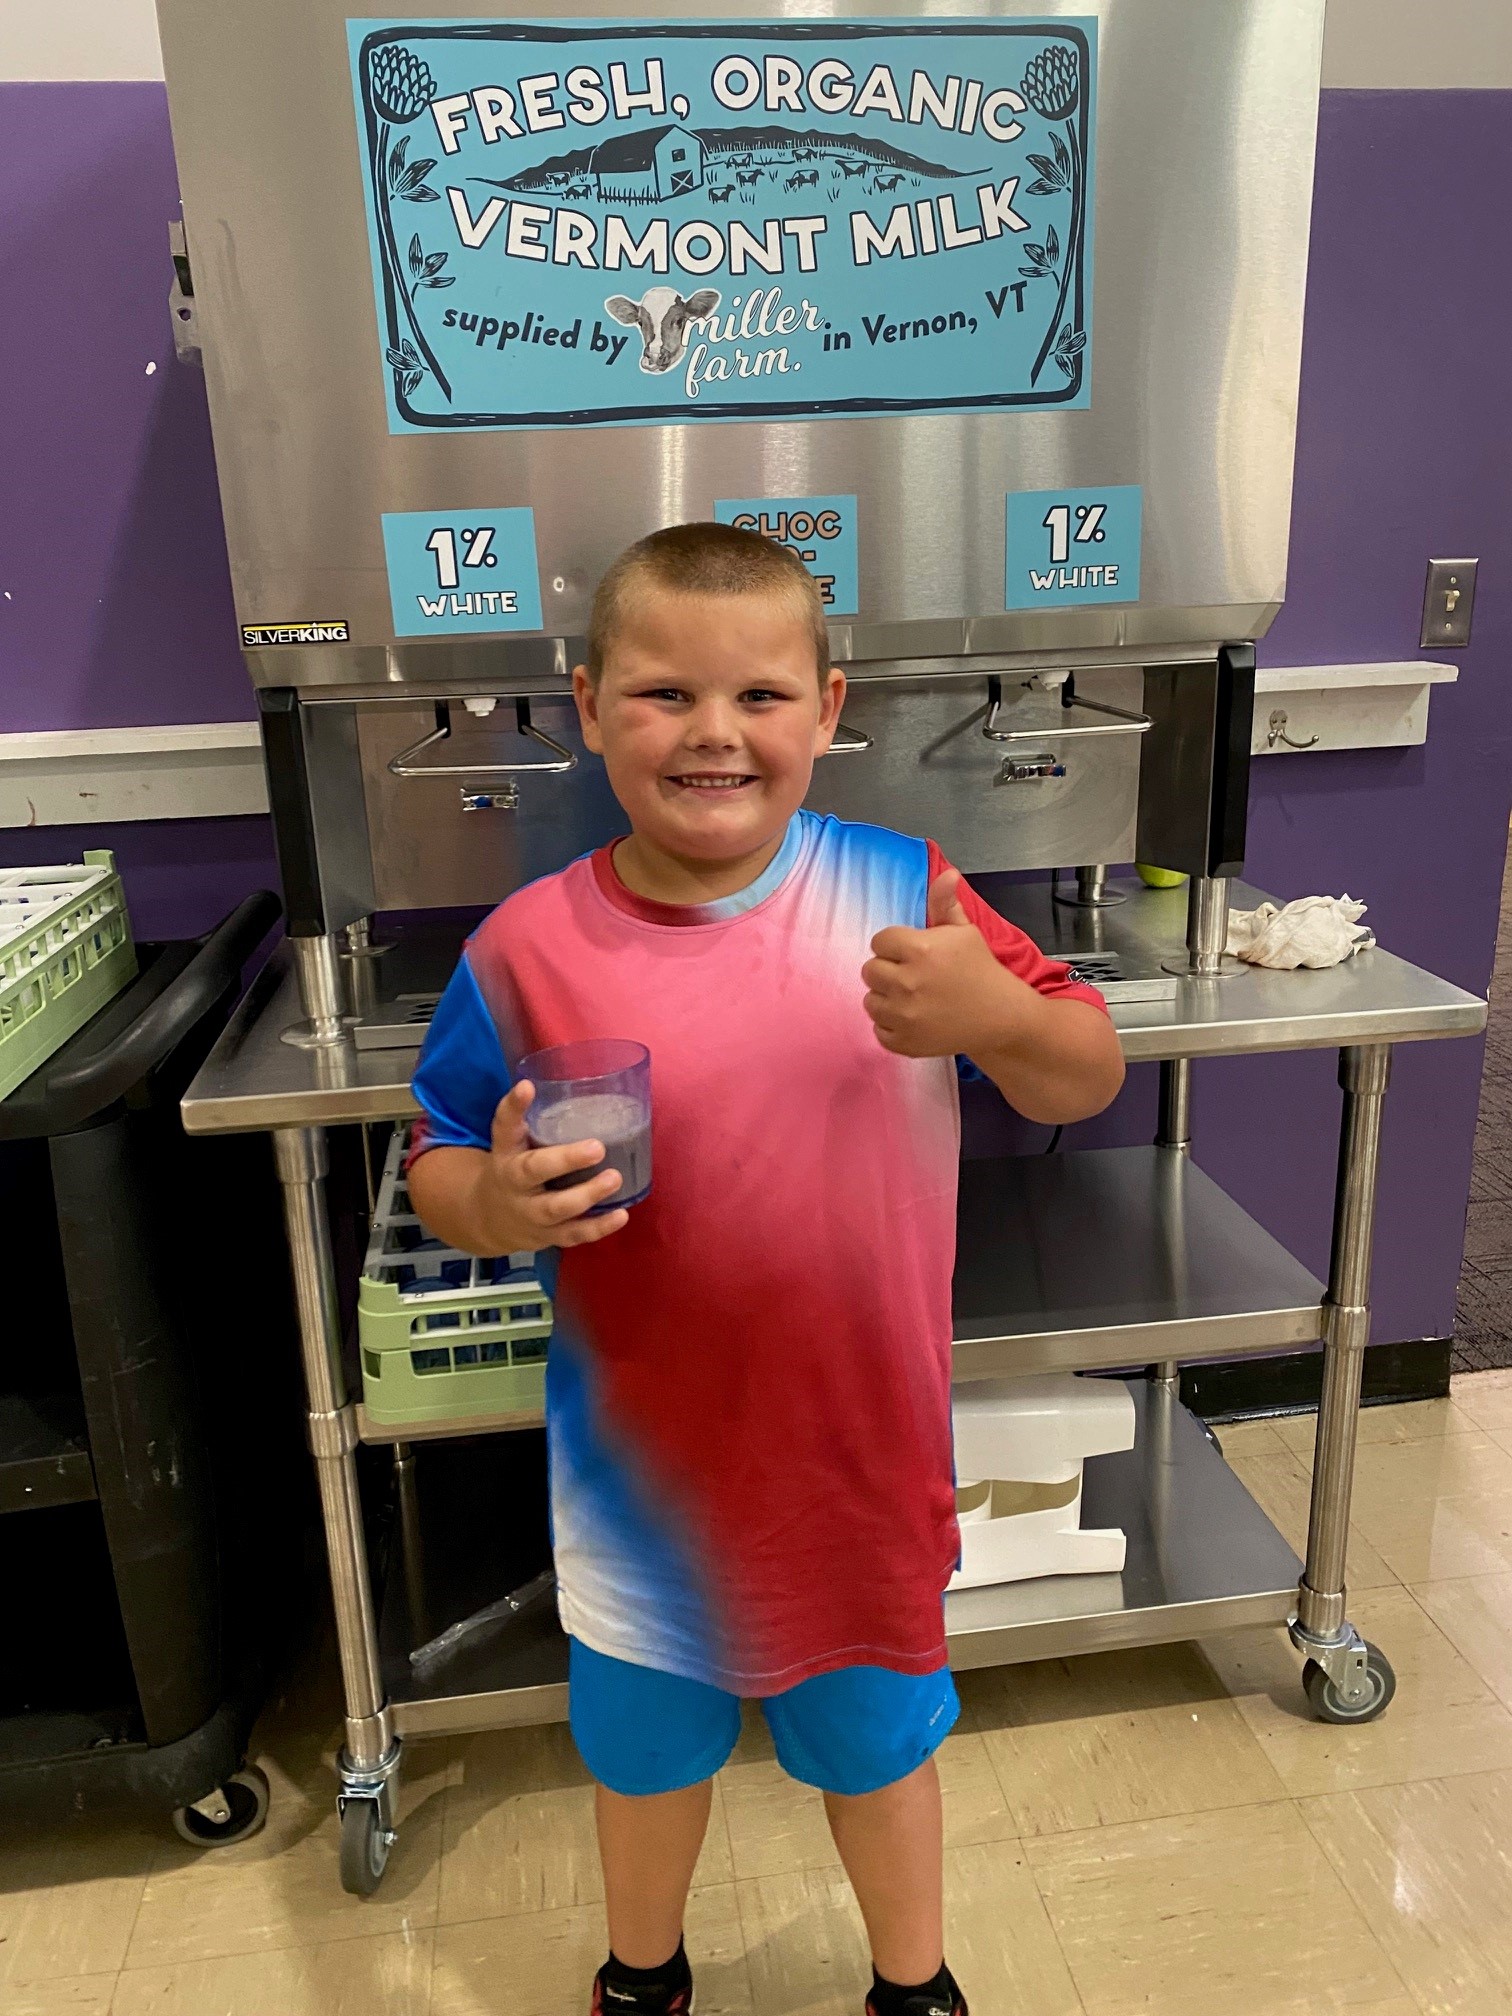 A kid gives a thumbs up a milk dispenser in a cafeteria